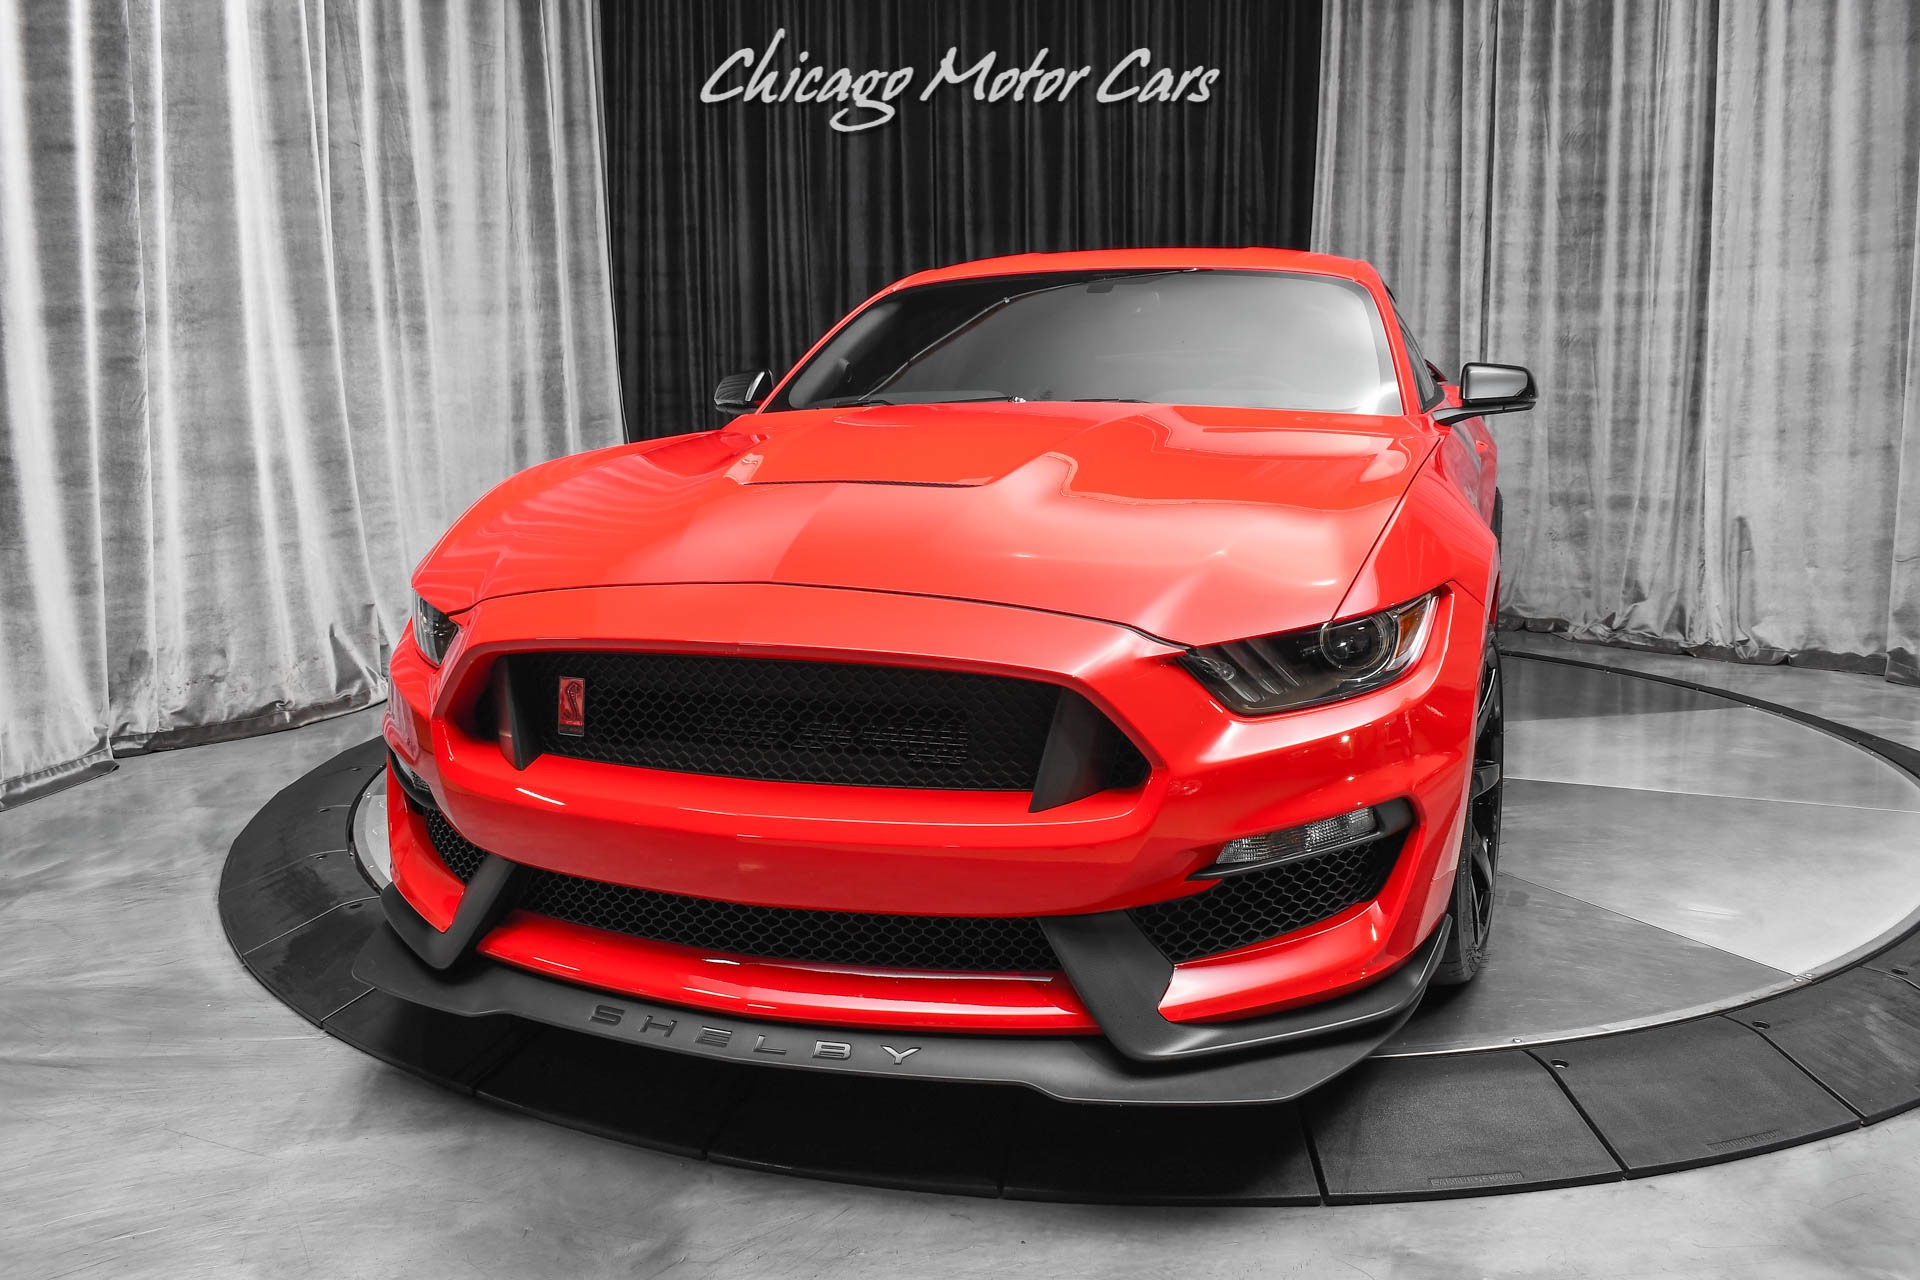 Used-2017-Ford-Mustang-Shelby-GT350R-Coupe-ONLY-44-Miles-Collector-QUALITY-Like-BRAND-NEW